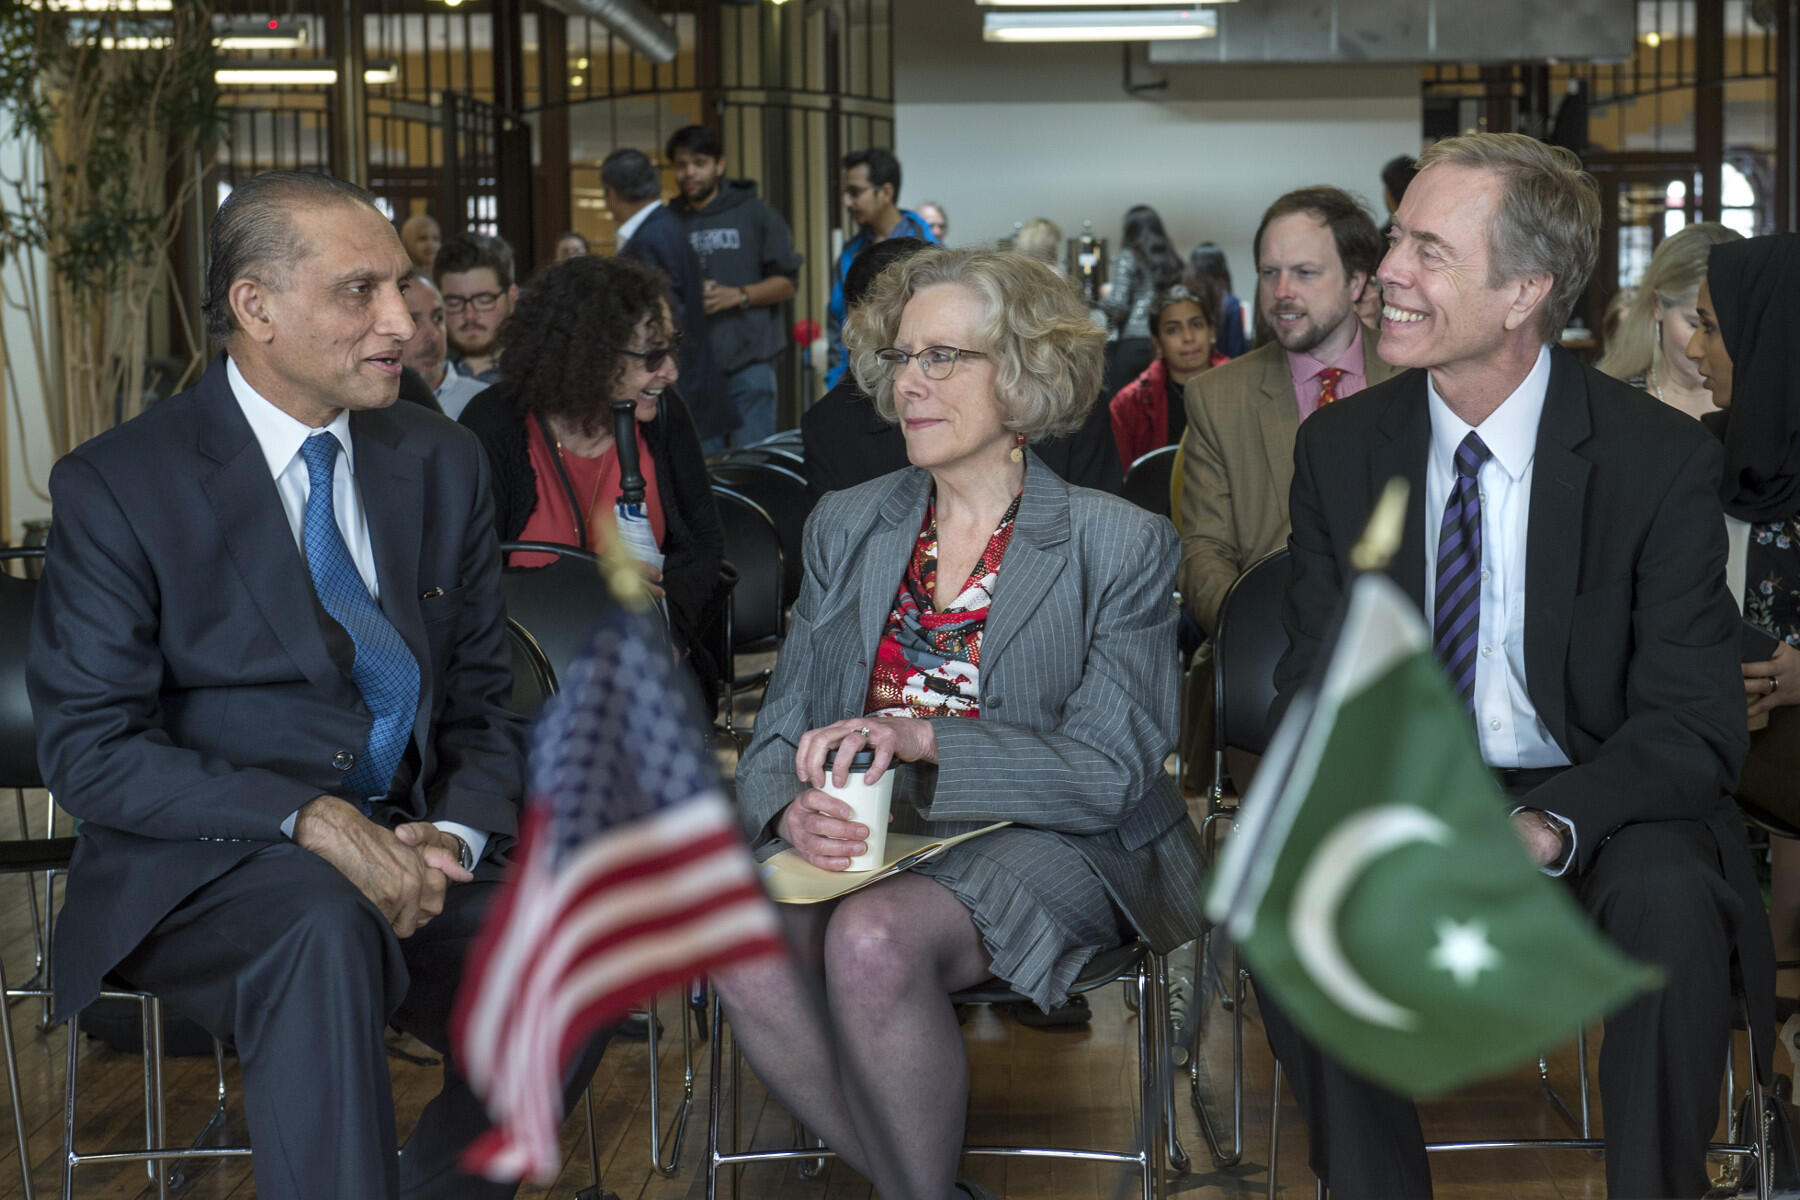 From left: Aizaz Ahmad Chaudhry, the ambassador of Pakistan to the United States; Wendy Kliewer, Ph.D., professor and chair of the Department of Psychology; and J. Randy Koch, Ph.D., research associate professor in the Department of Psychology and program coordinator of the Hubert H. Humphrey Fellowship Program at VCU.